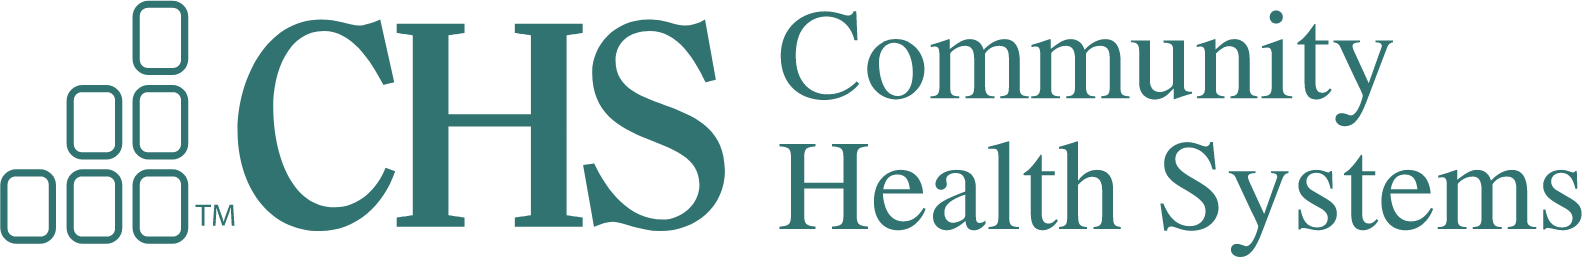 Community Health Systems
 logo large (transparent PNG)